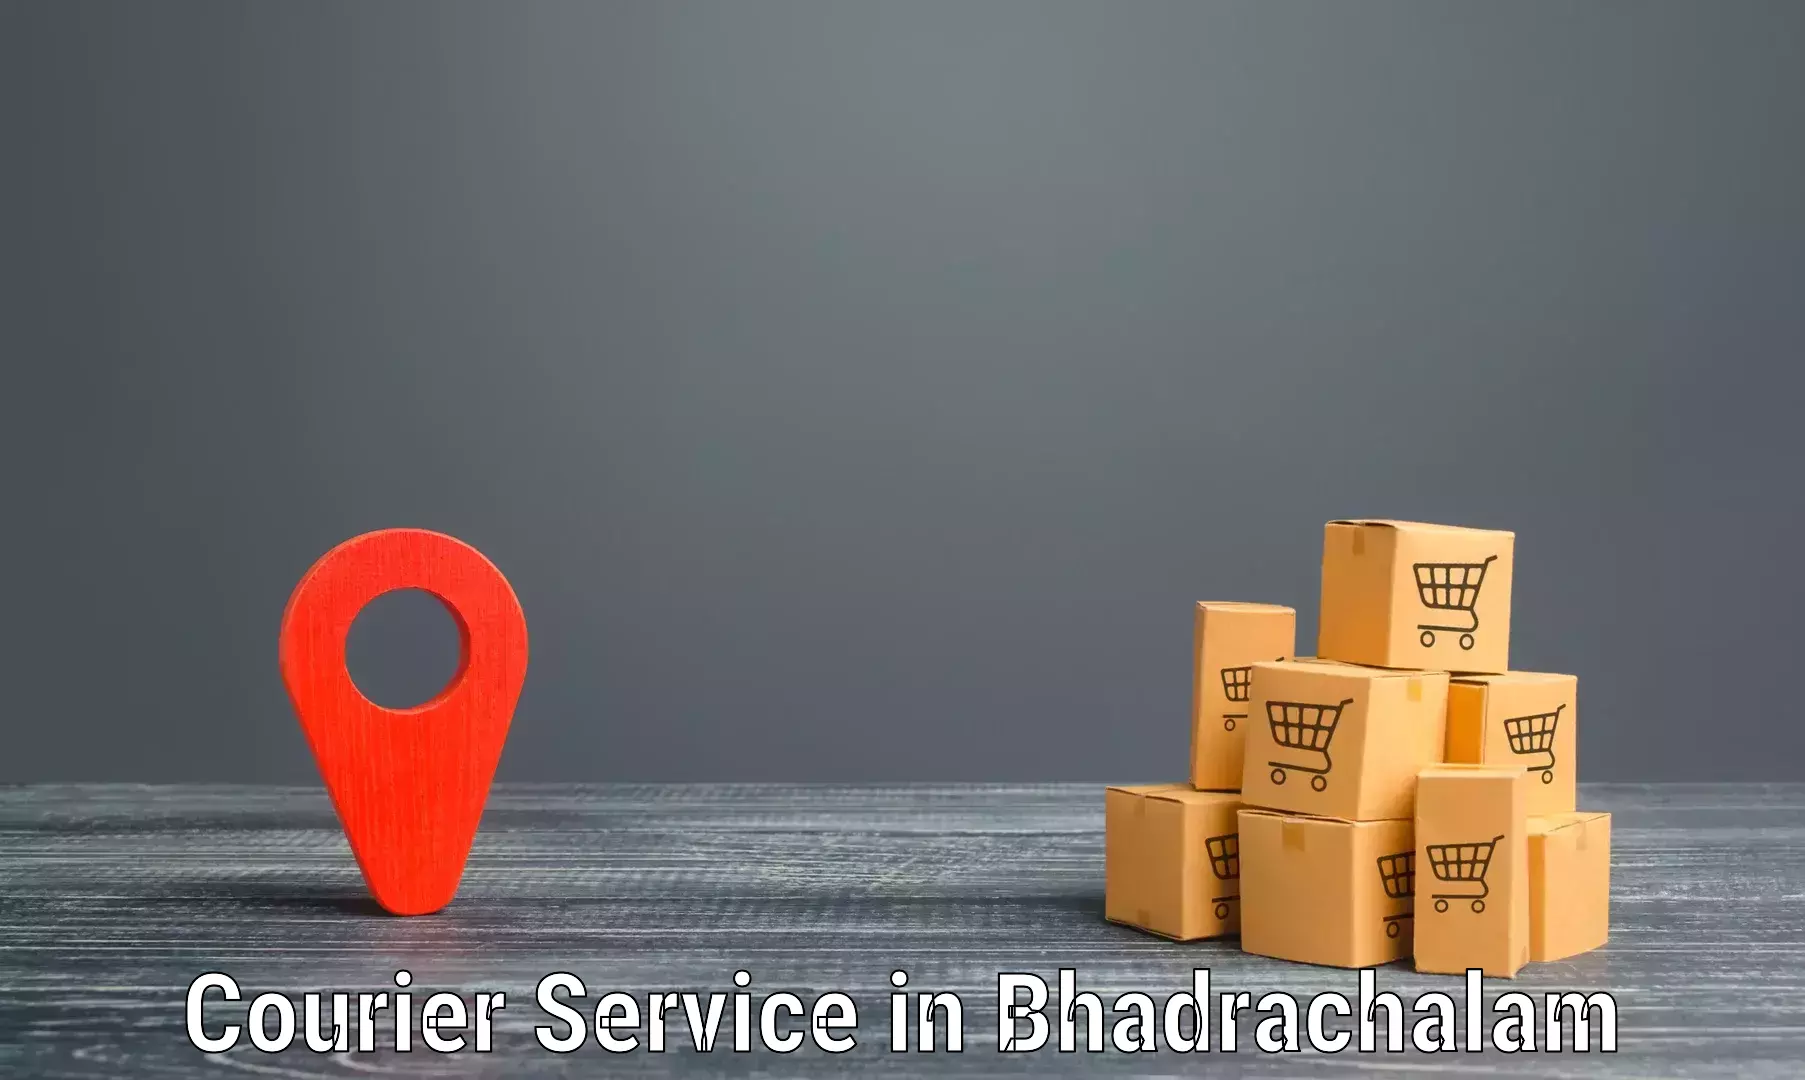 Customizable delivery plans in Bhadrachalam